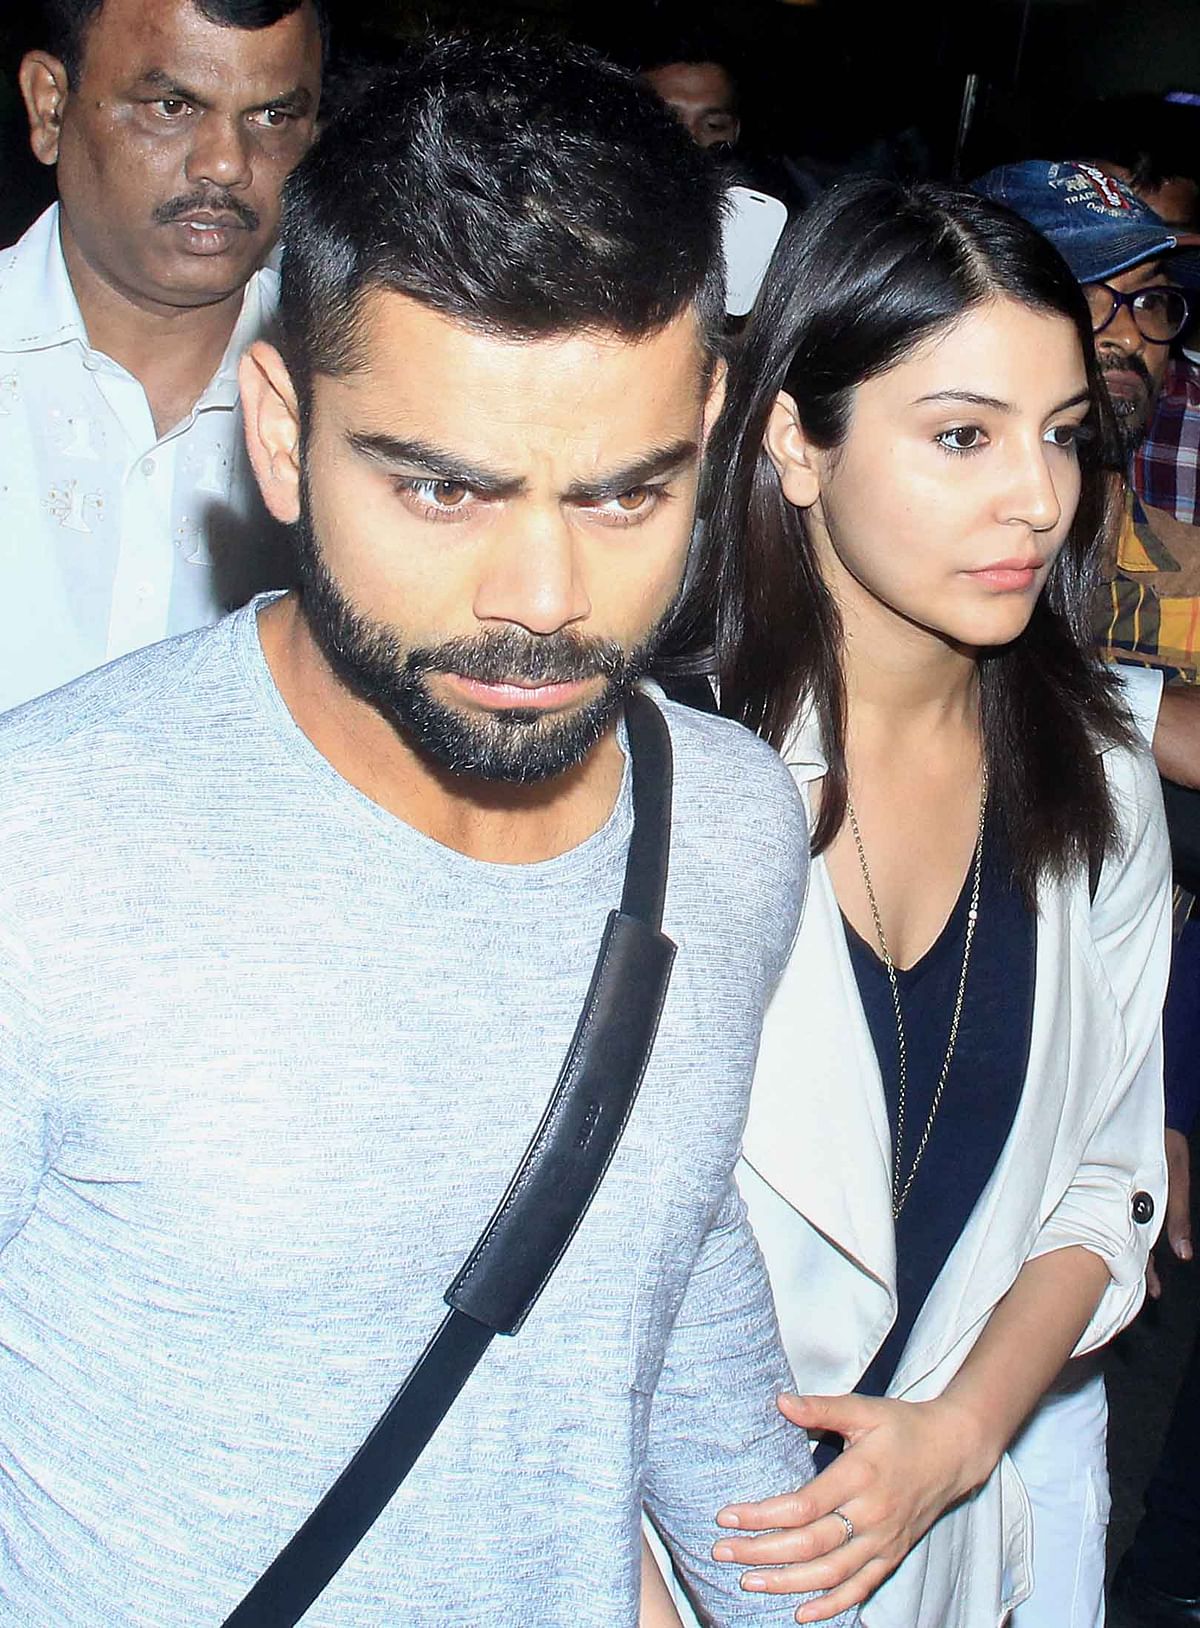 Anushka & Virat - In love and expressing it. In a show of solidarity the couple held hands as they exited Mumbai airport. How Cool!